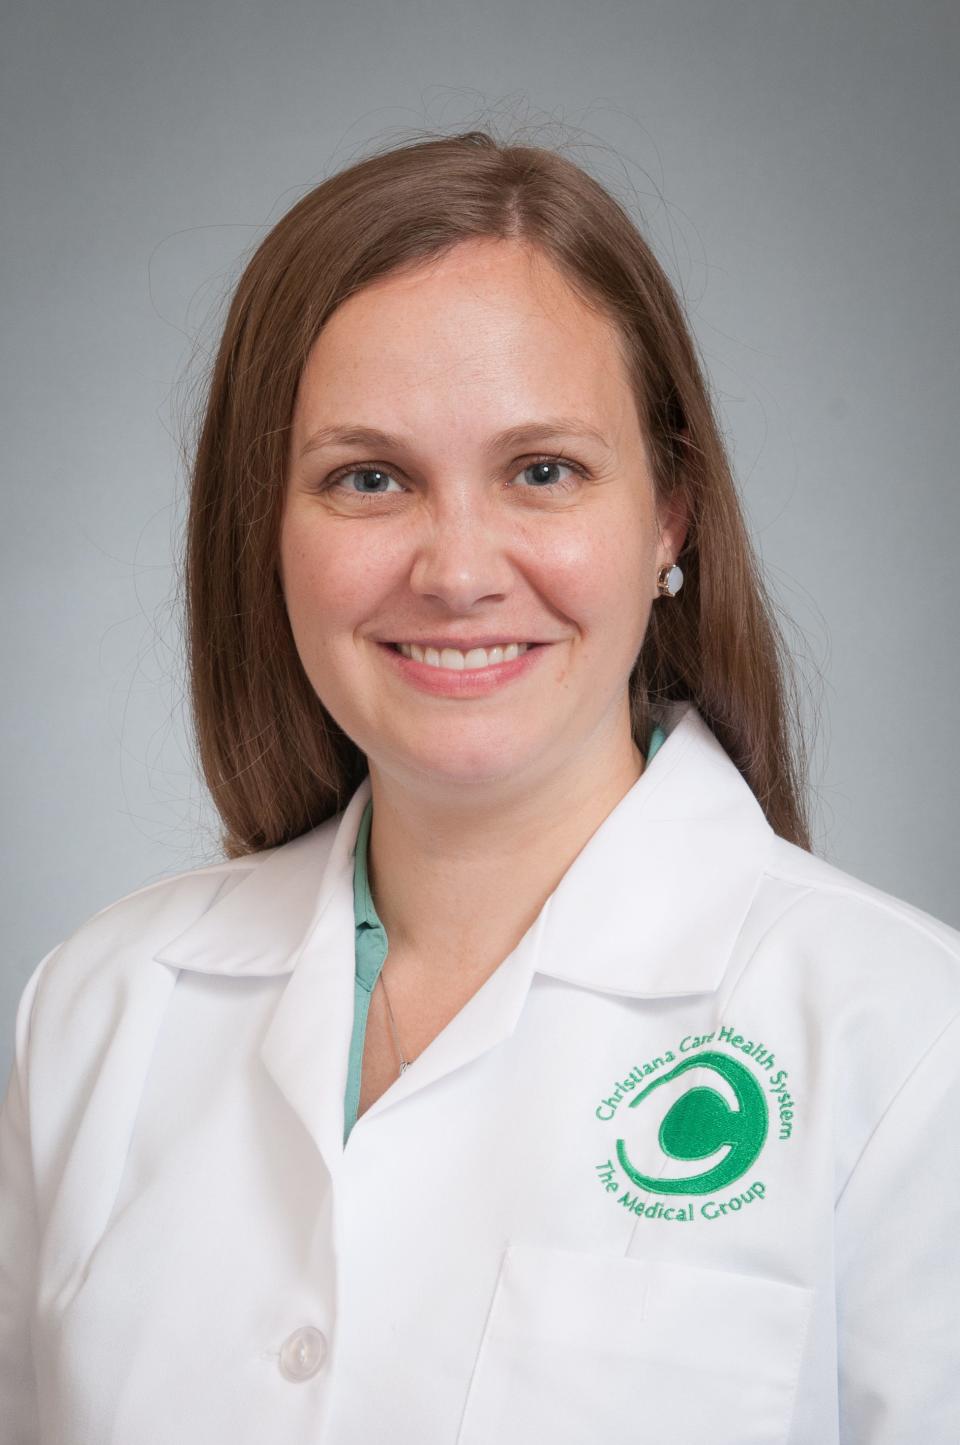 Dr. Chaney Stewman specializes in sports medicine at ChristianaCare and is Program Director of the Sports Medicine Fellowship program.